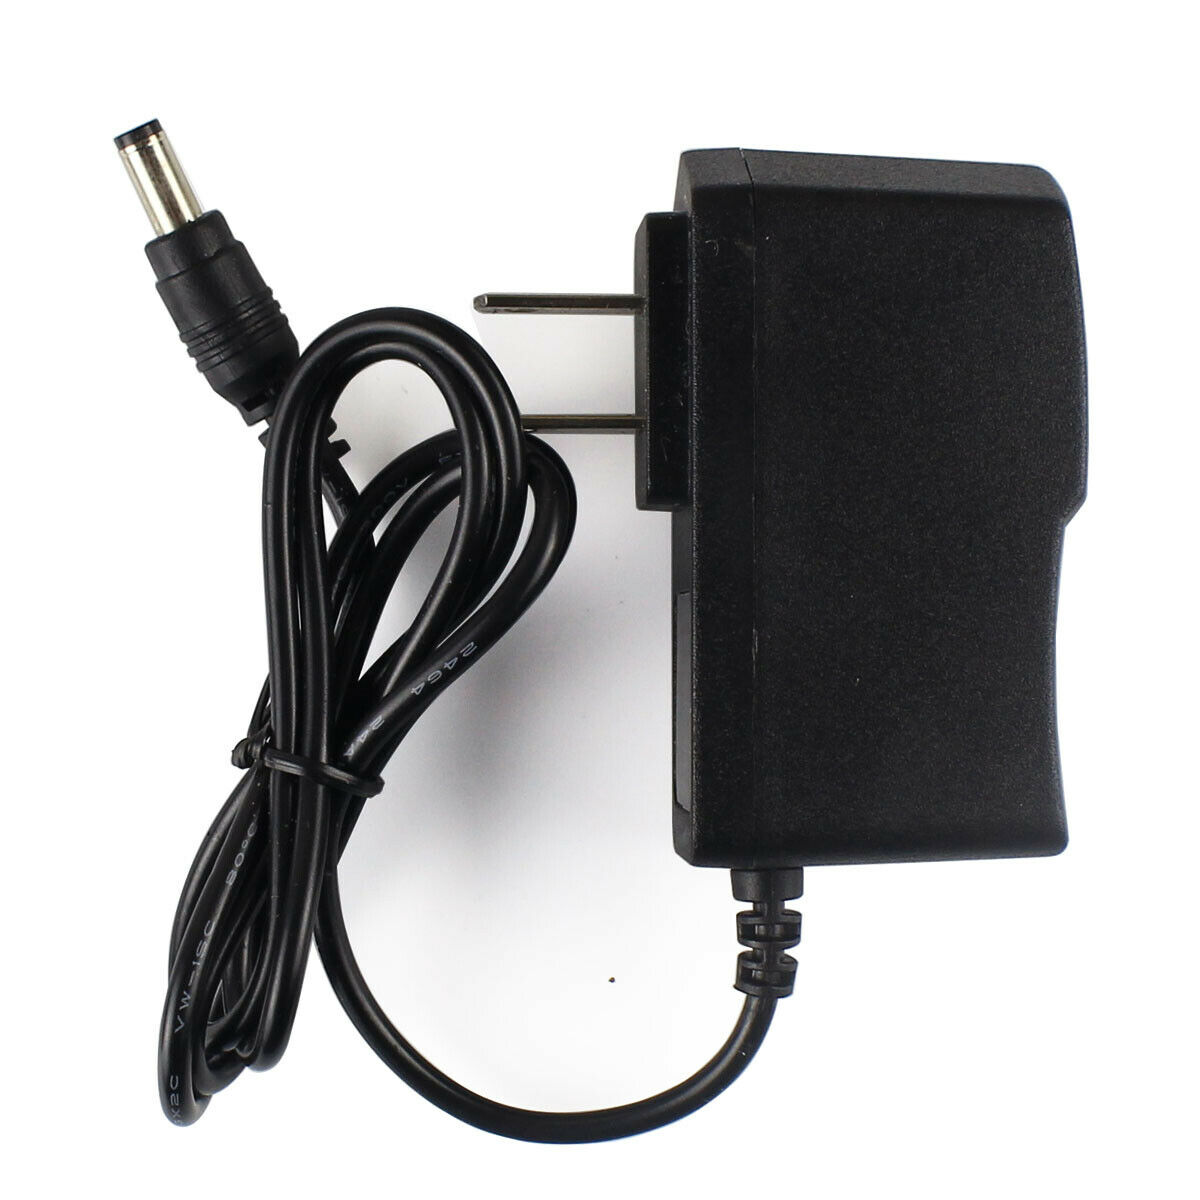 NEW AC Adapter For Metrologic Honeywell 3A-052WP05 P/N: 00-06324 DC Power Supply Brand: Unbranded Type: Adapter Out